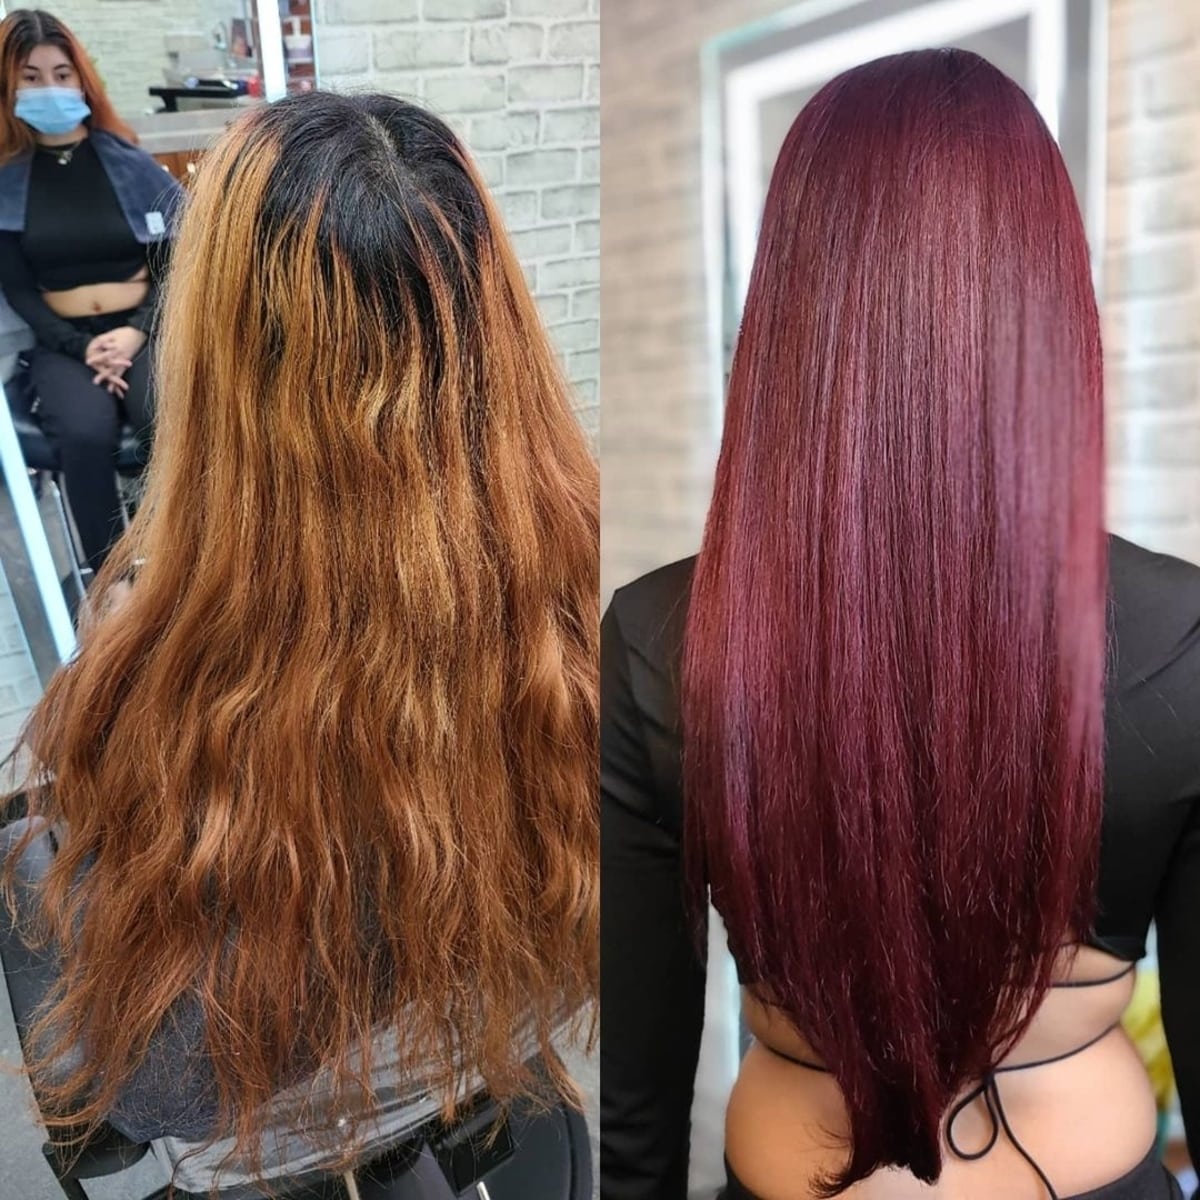 Before and after maroon hair transformation